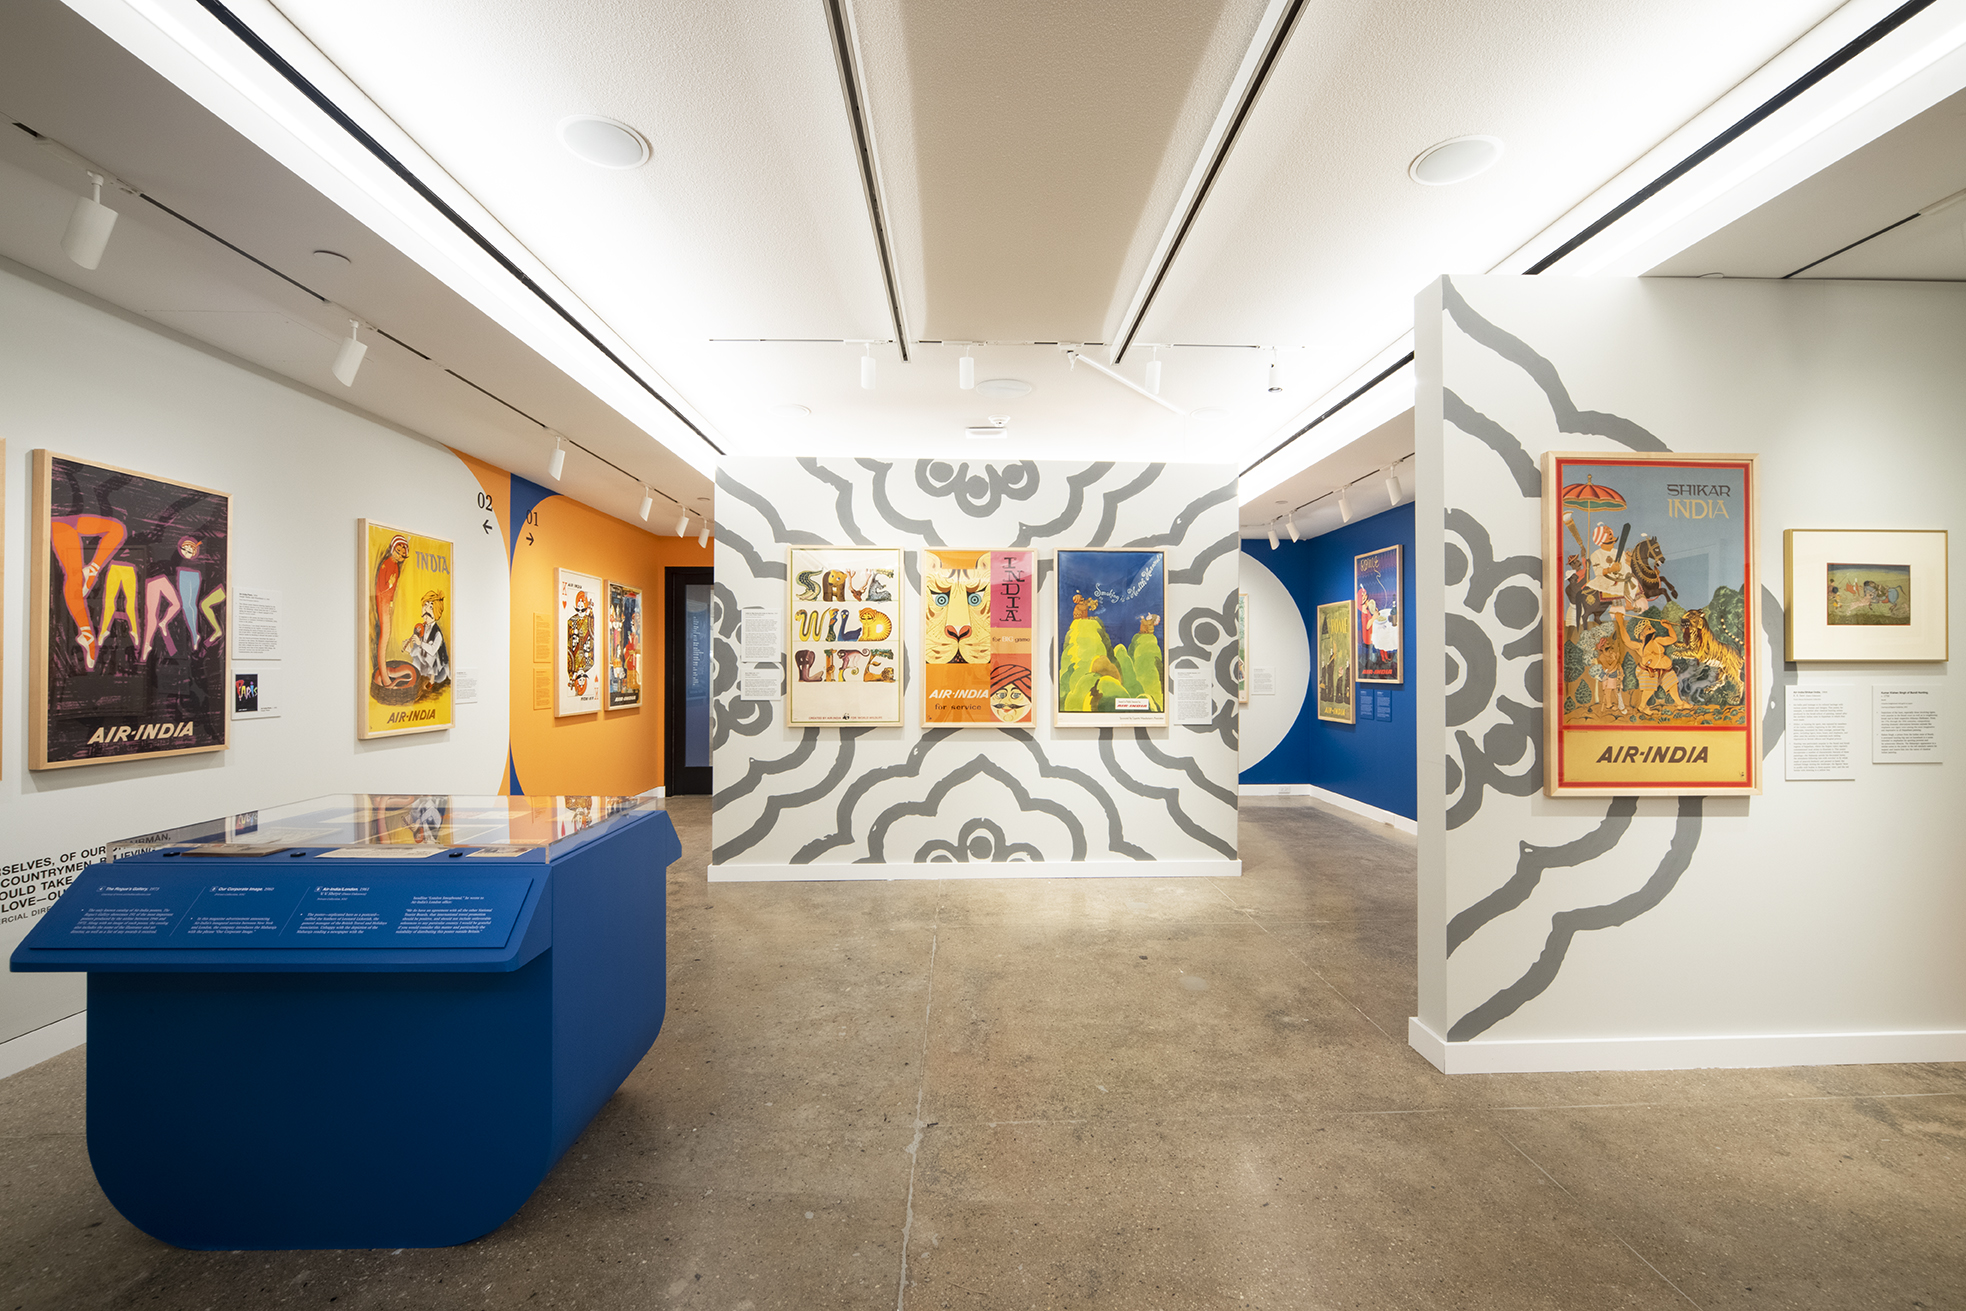 A gallery space with framed posters from Air India airlines lining the outer walls and a wall space in the center of the room. On the left there is a blue, rounded display case of printed Air India historical objects.